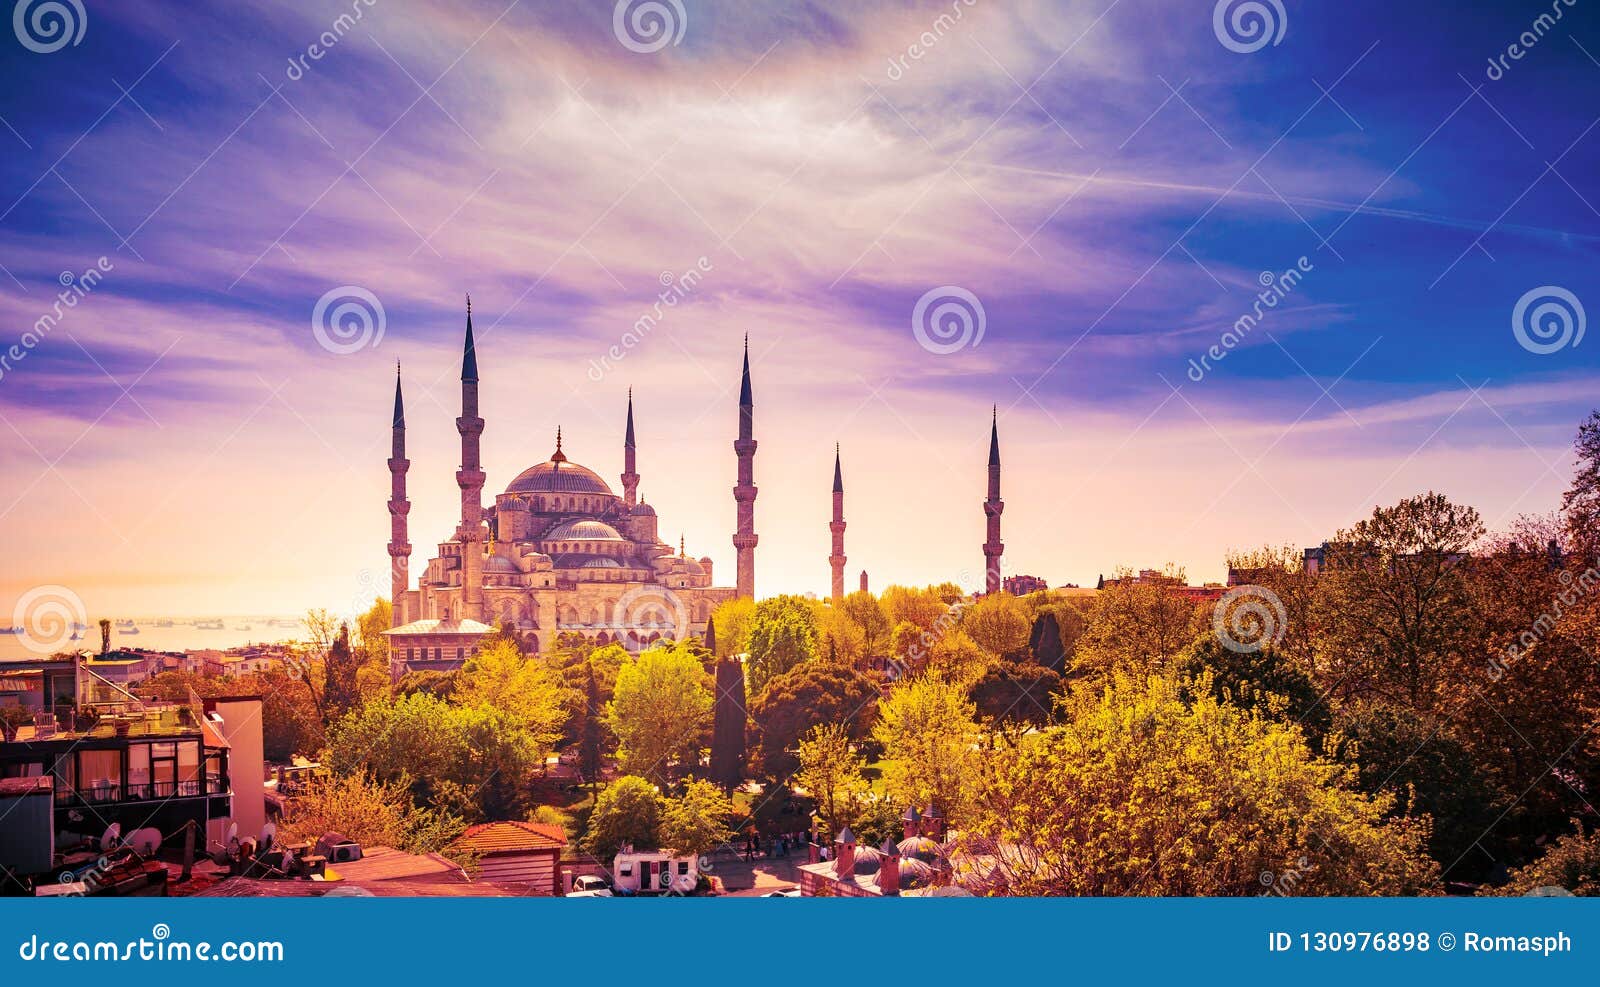 aerial shot of blue mosque surrounded by trees in istanbul`s old city - sultanahmet, istanbul, turkey